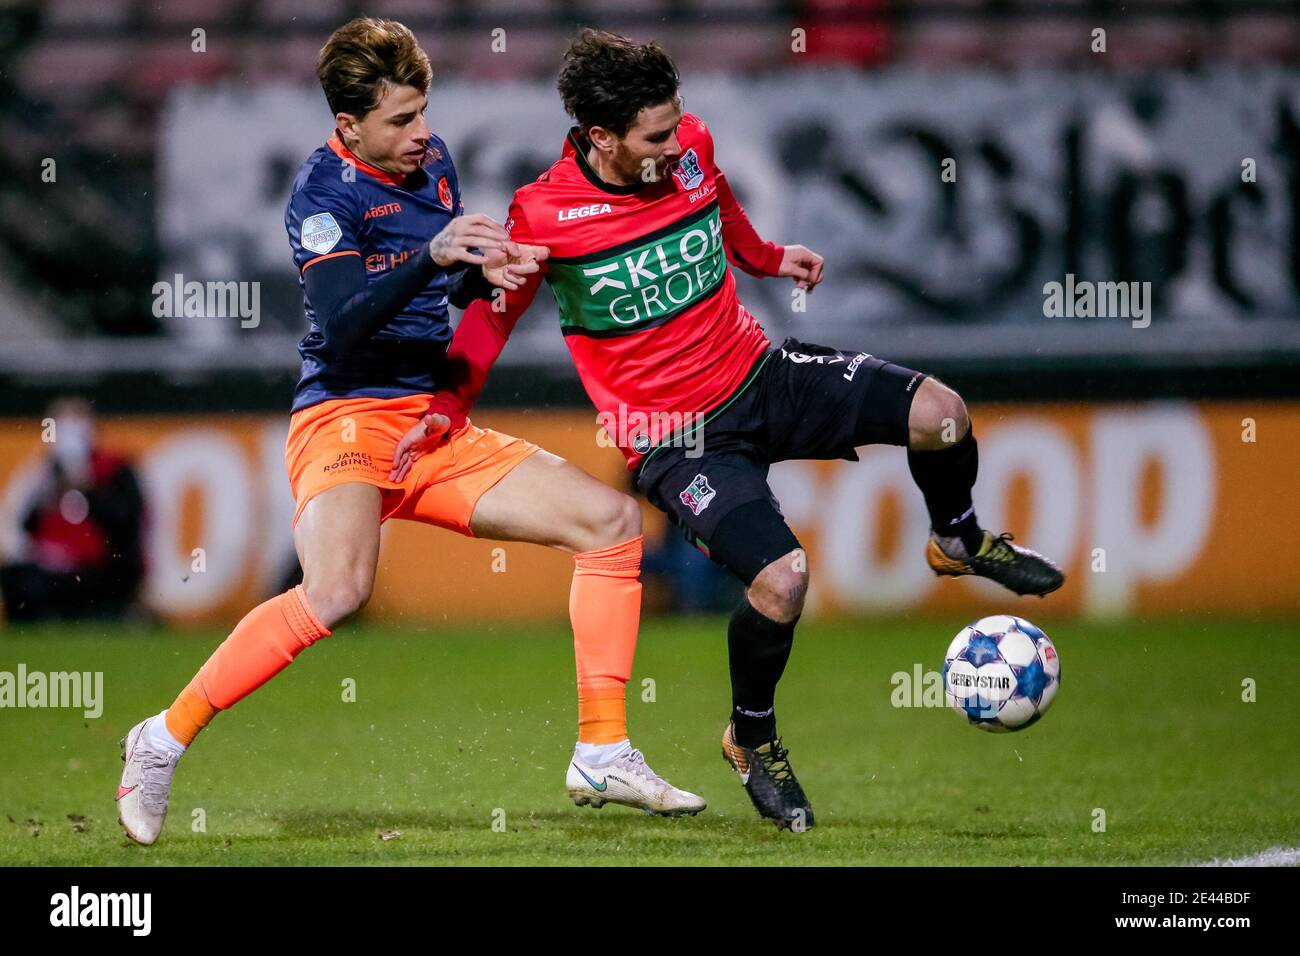 NIJMEGEN, NETHERLANDS - JANUARY 21: (L-R): Lazaros Rota of Fortuna Sittard, Jordy Bruijn of NEC during the Dutch KNVB Cup match between NEC and Fortun Stock Photo